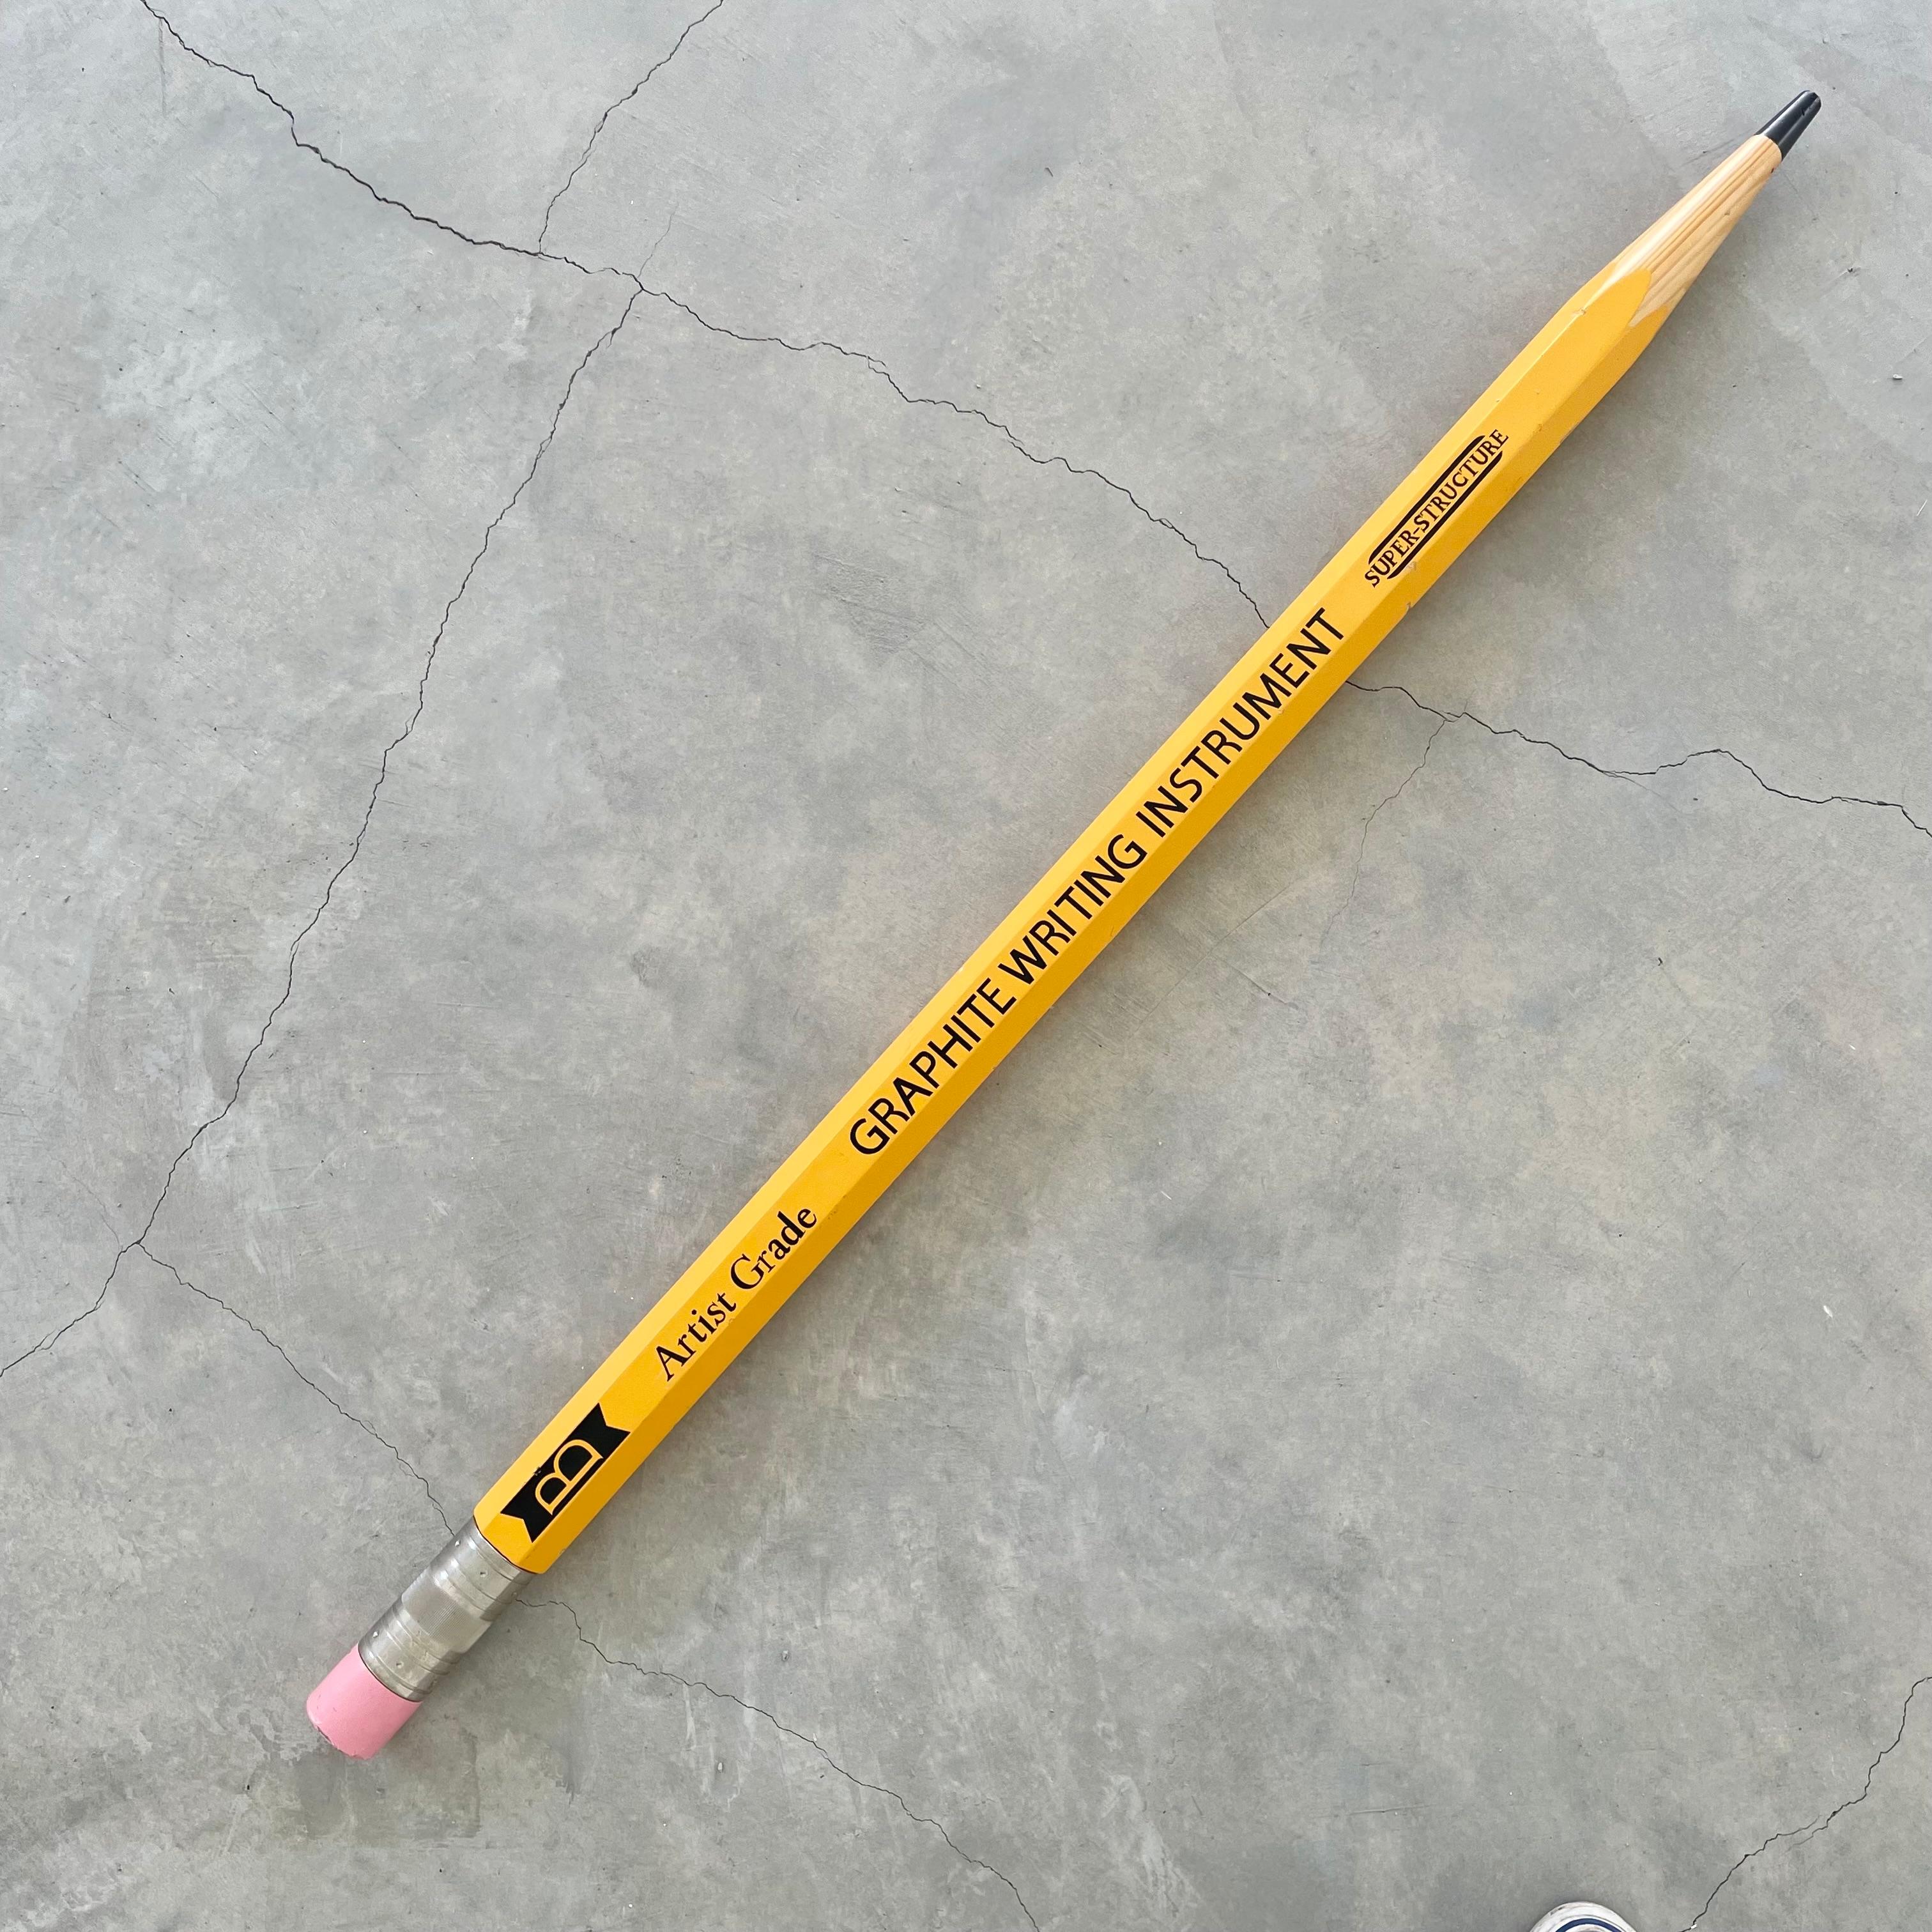 Massive vintage display pencil. Made of one solid piece of wood and a machine engraved metal ring wrapped around the end by the eraser. Size: 60